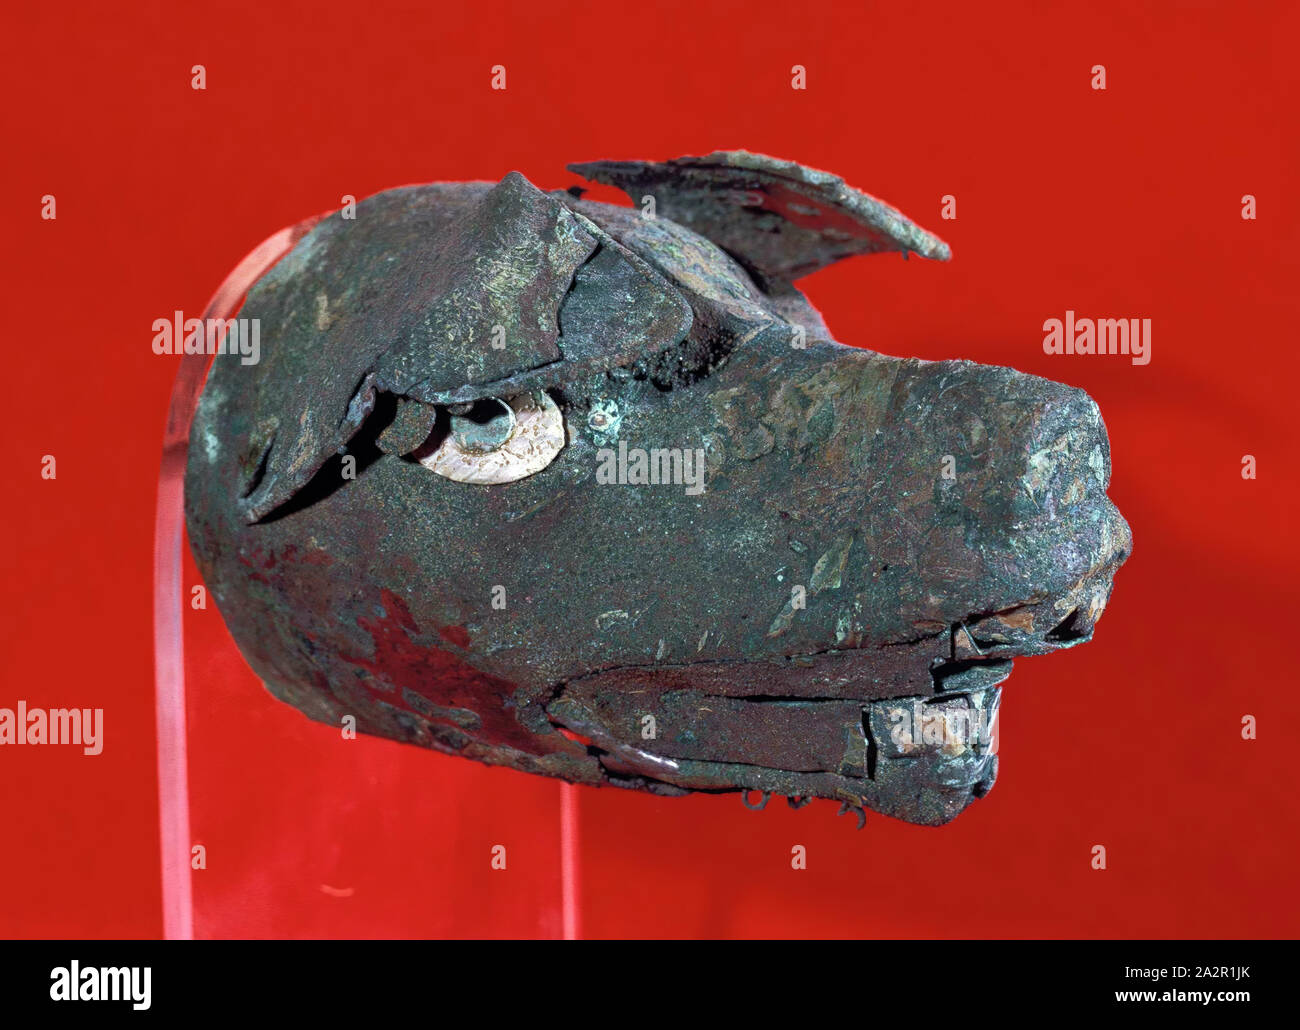 Mochica Precolumbian Head Of A Fox Between 500 And 700 Hammered Copper With Shell And Traces Of Gilding Overall 3 3 4 4 5 8 5 1 2 Inches 9 5 11 7 14 Cm Stock Photo Alamy